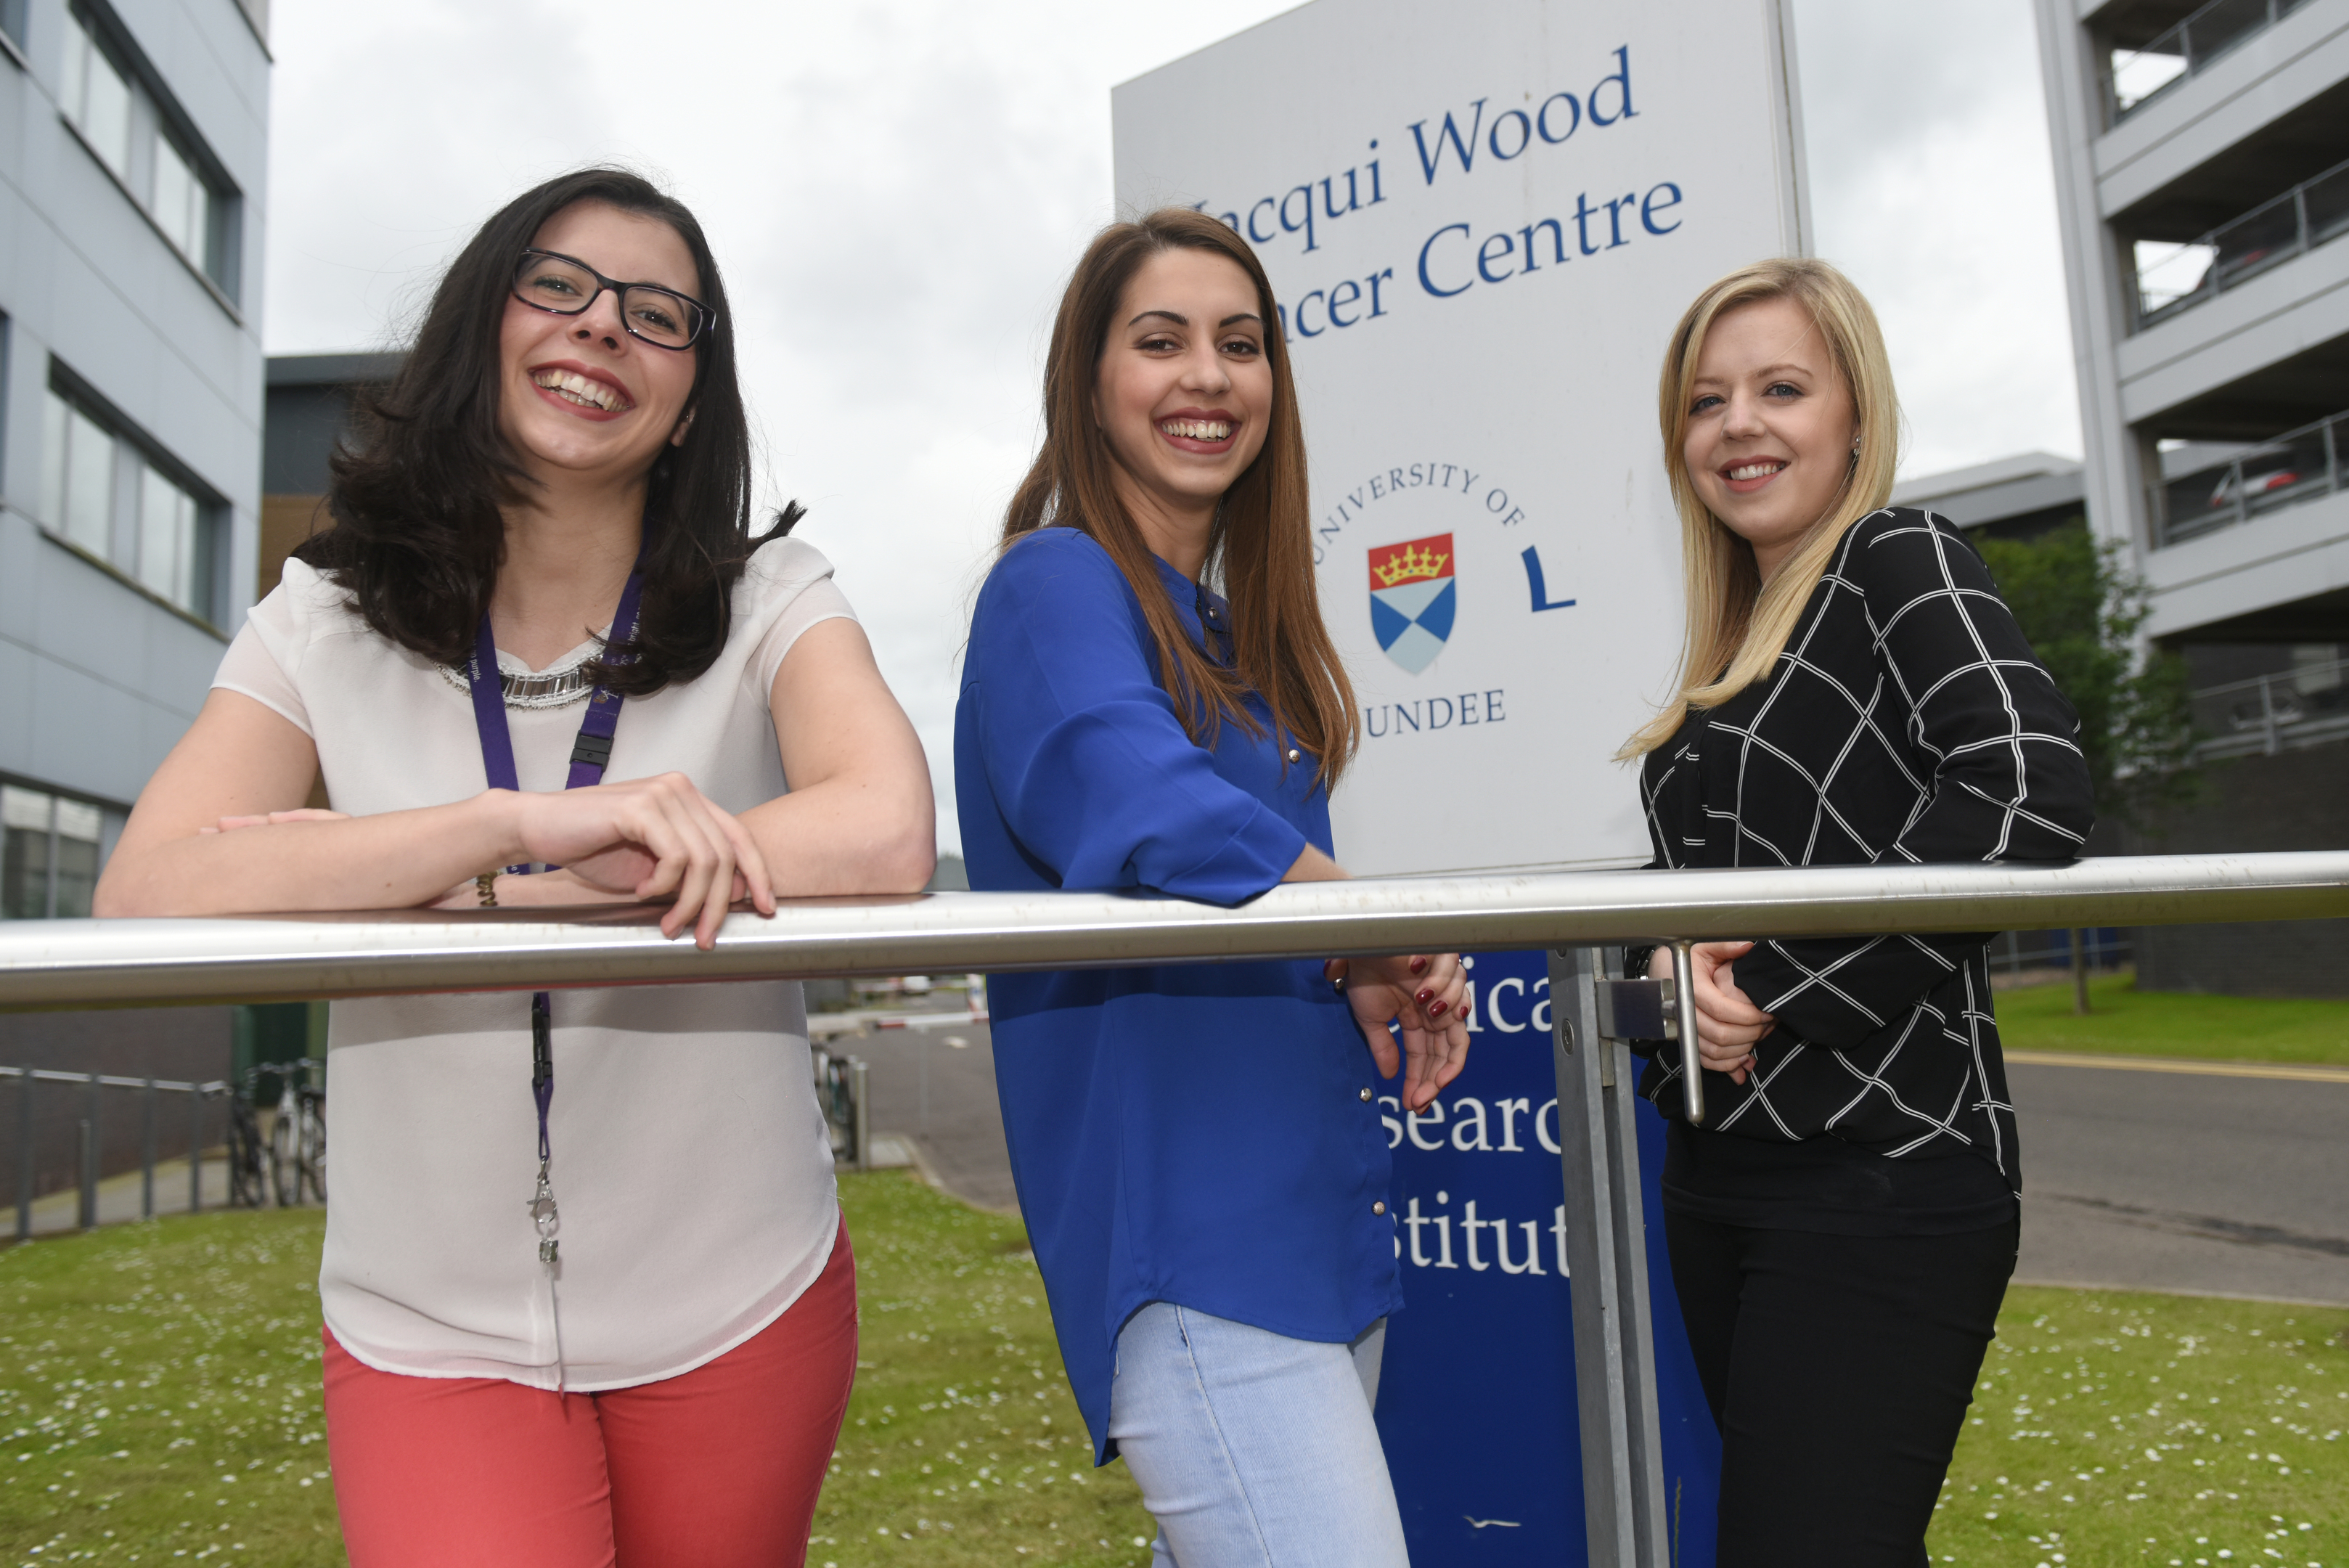 Dundee welcomes new generation of cancer specialists - The Courier - The Courier